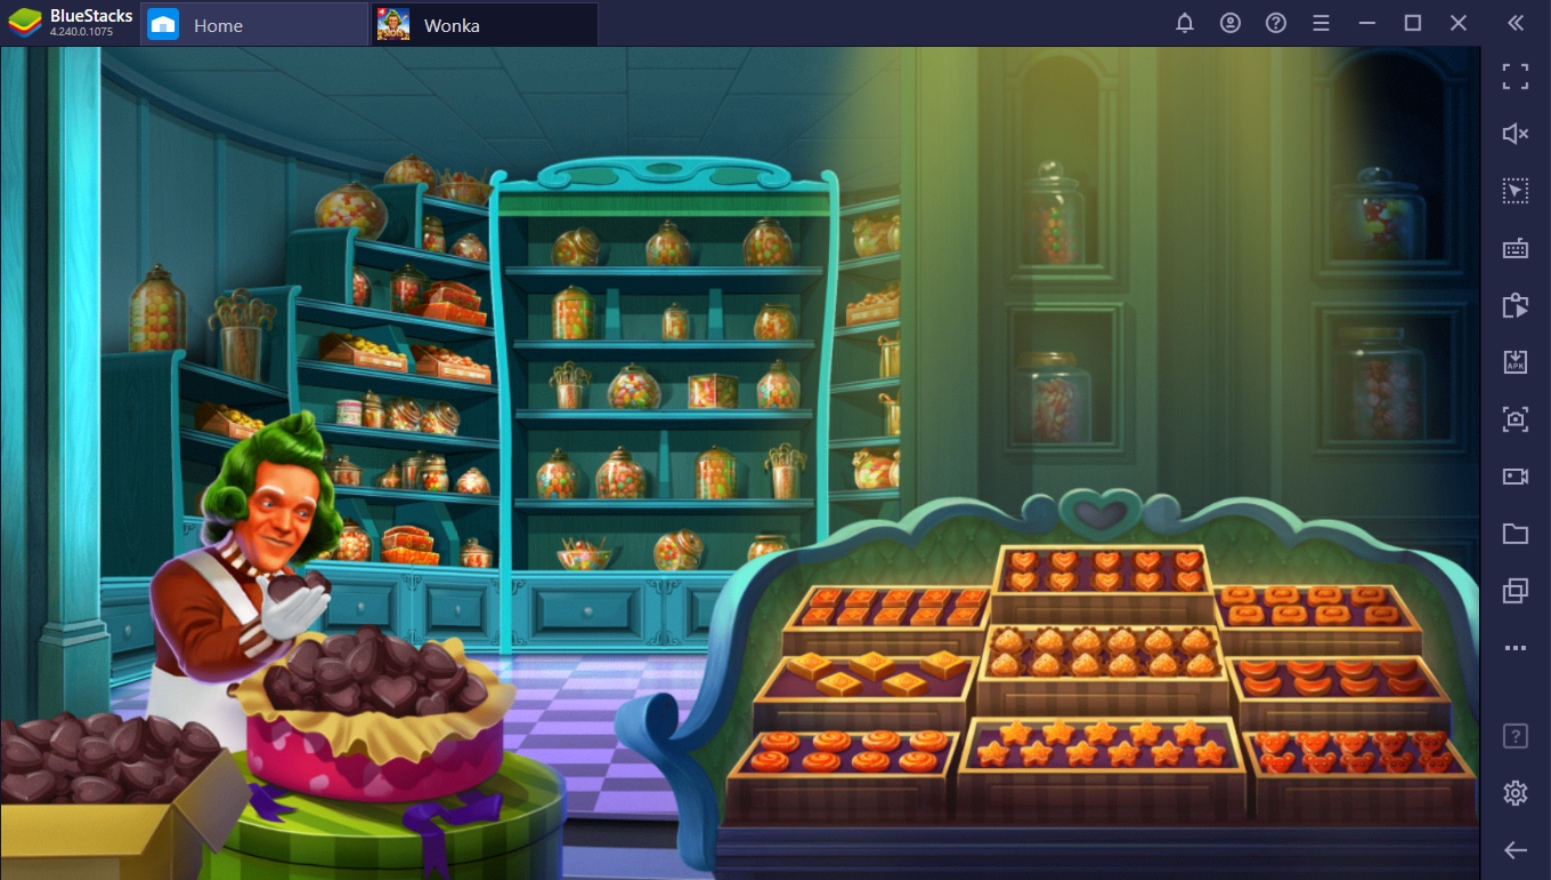 How to Play Willy Wonka Casino On PC With BlueStacks